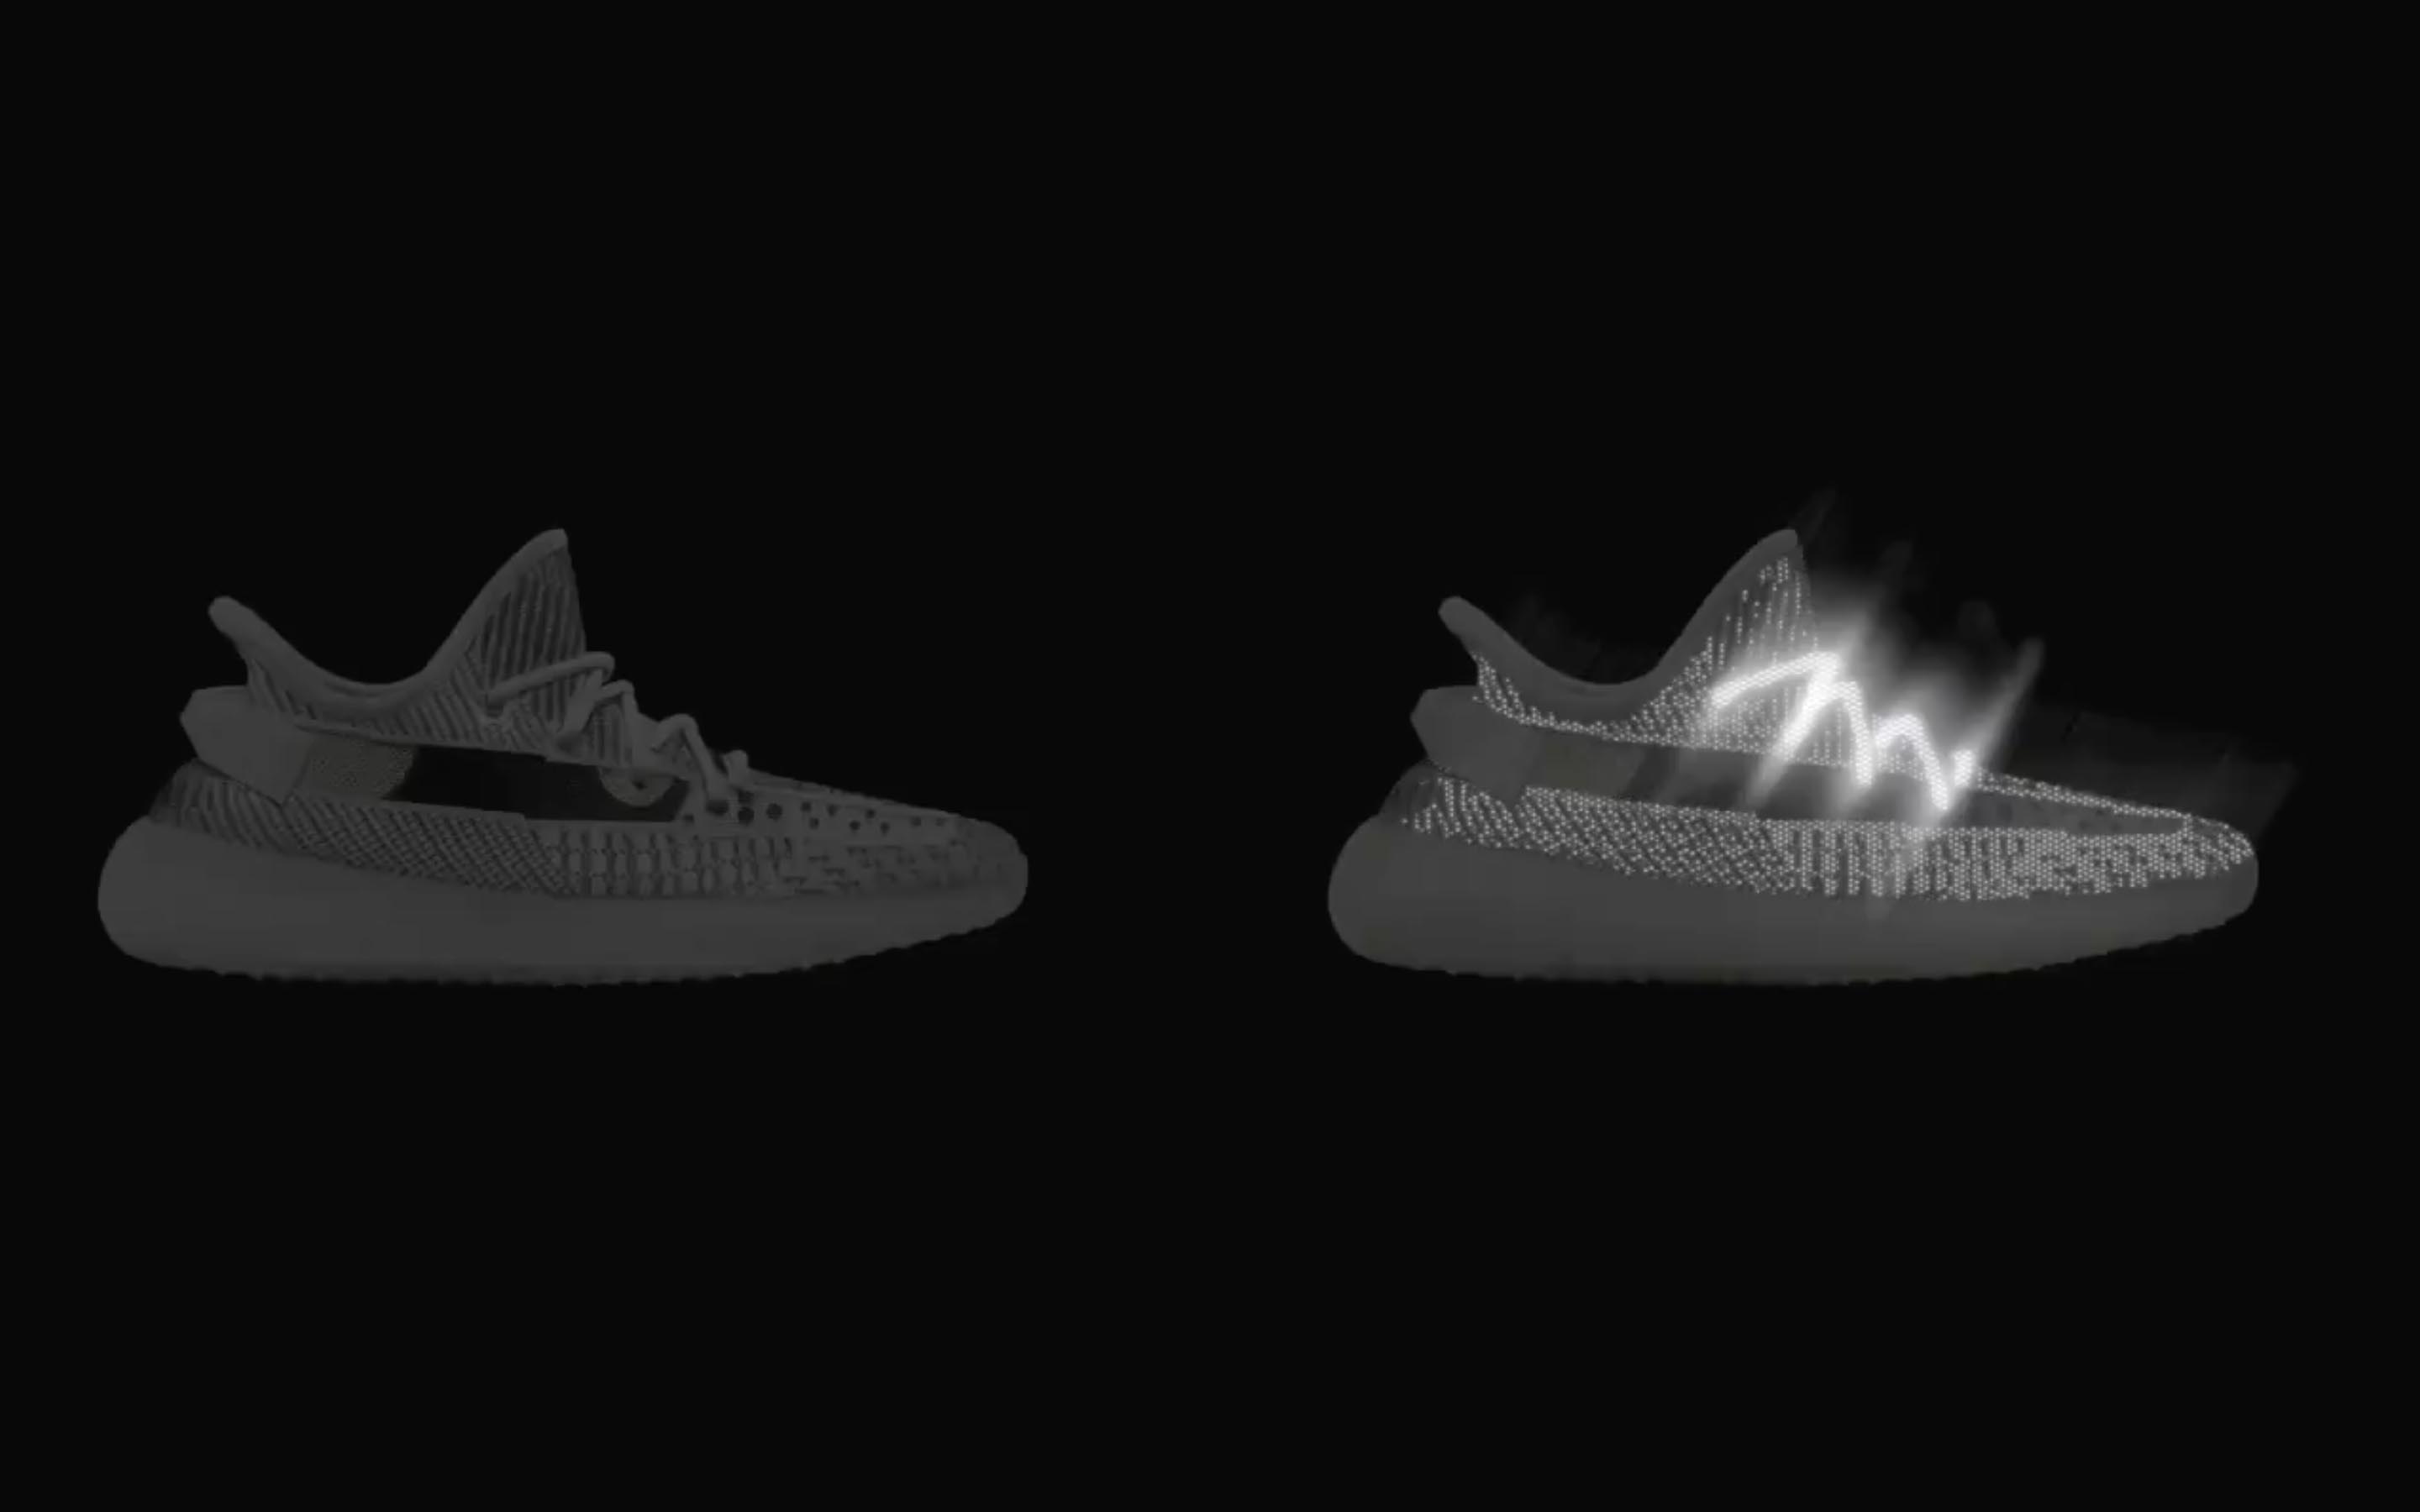 The adidas Yeezy Boost 350 V2 'Static 